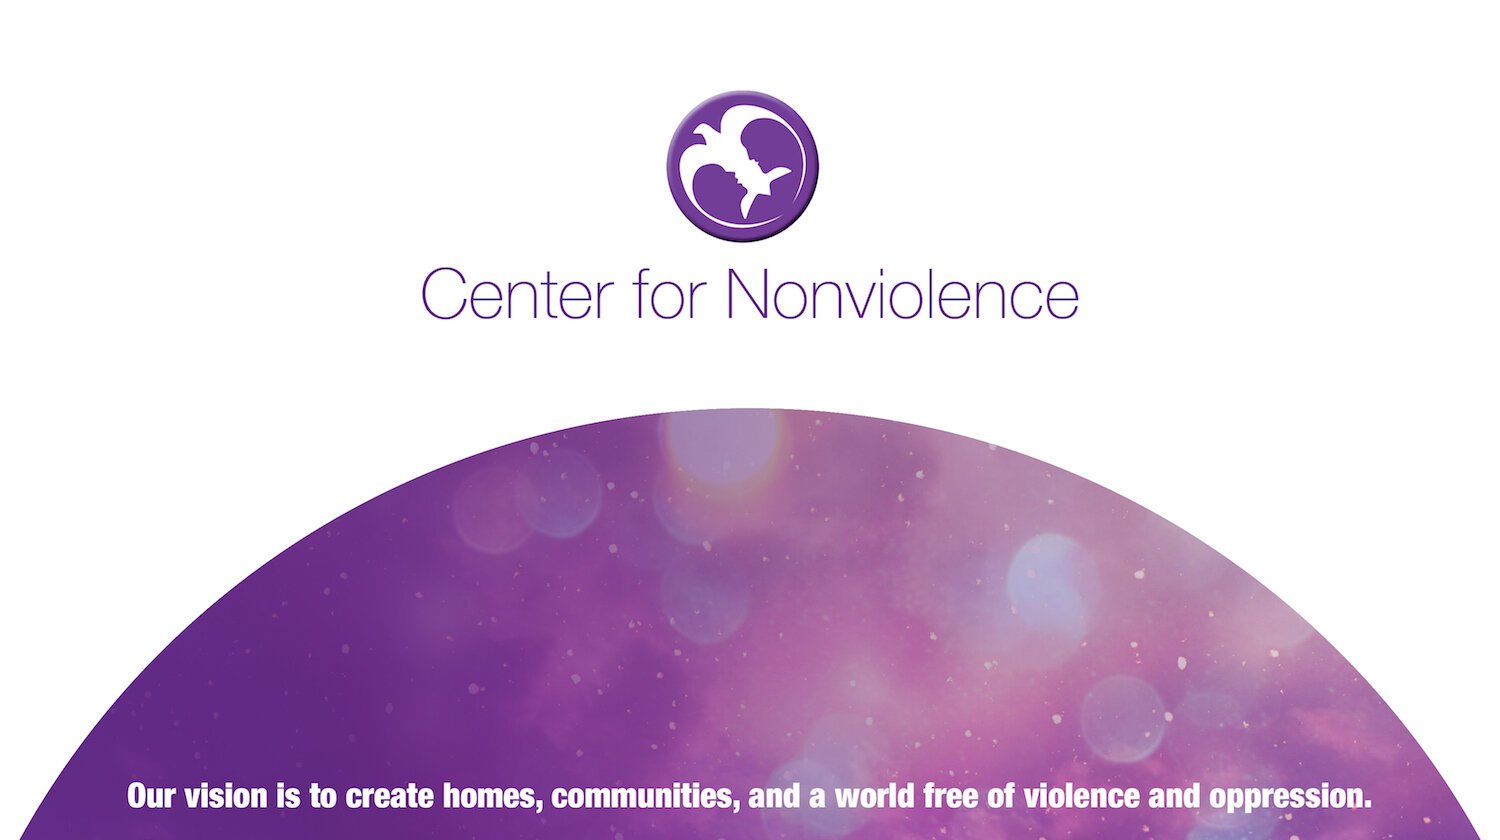 The Center for Nonviolence is located at 235 Creighton Ave.